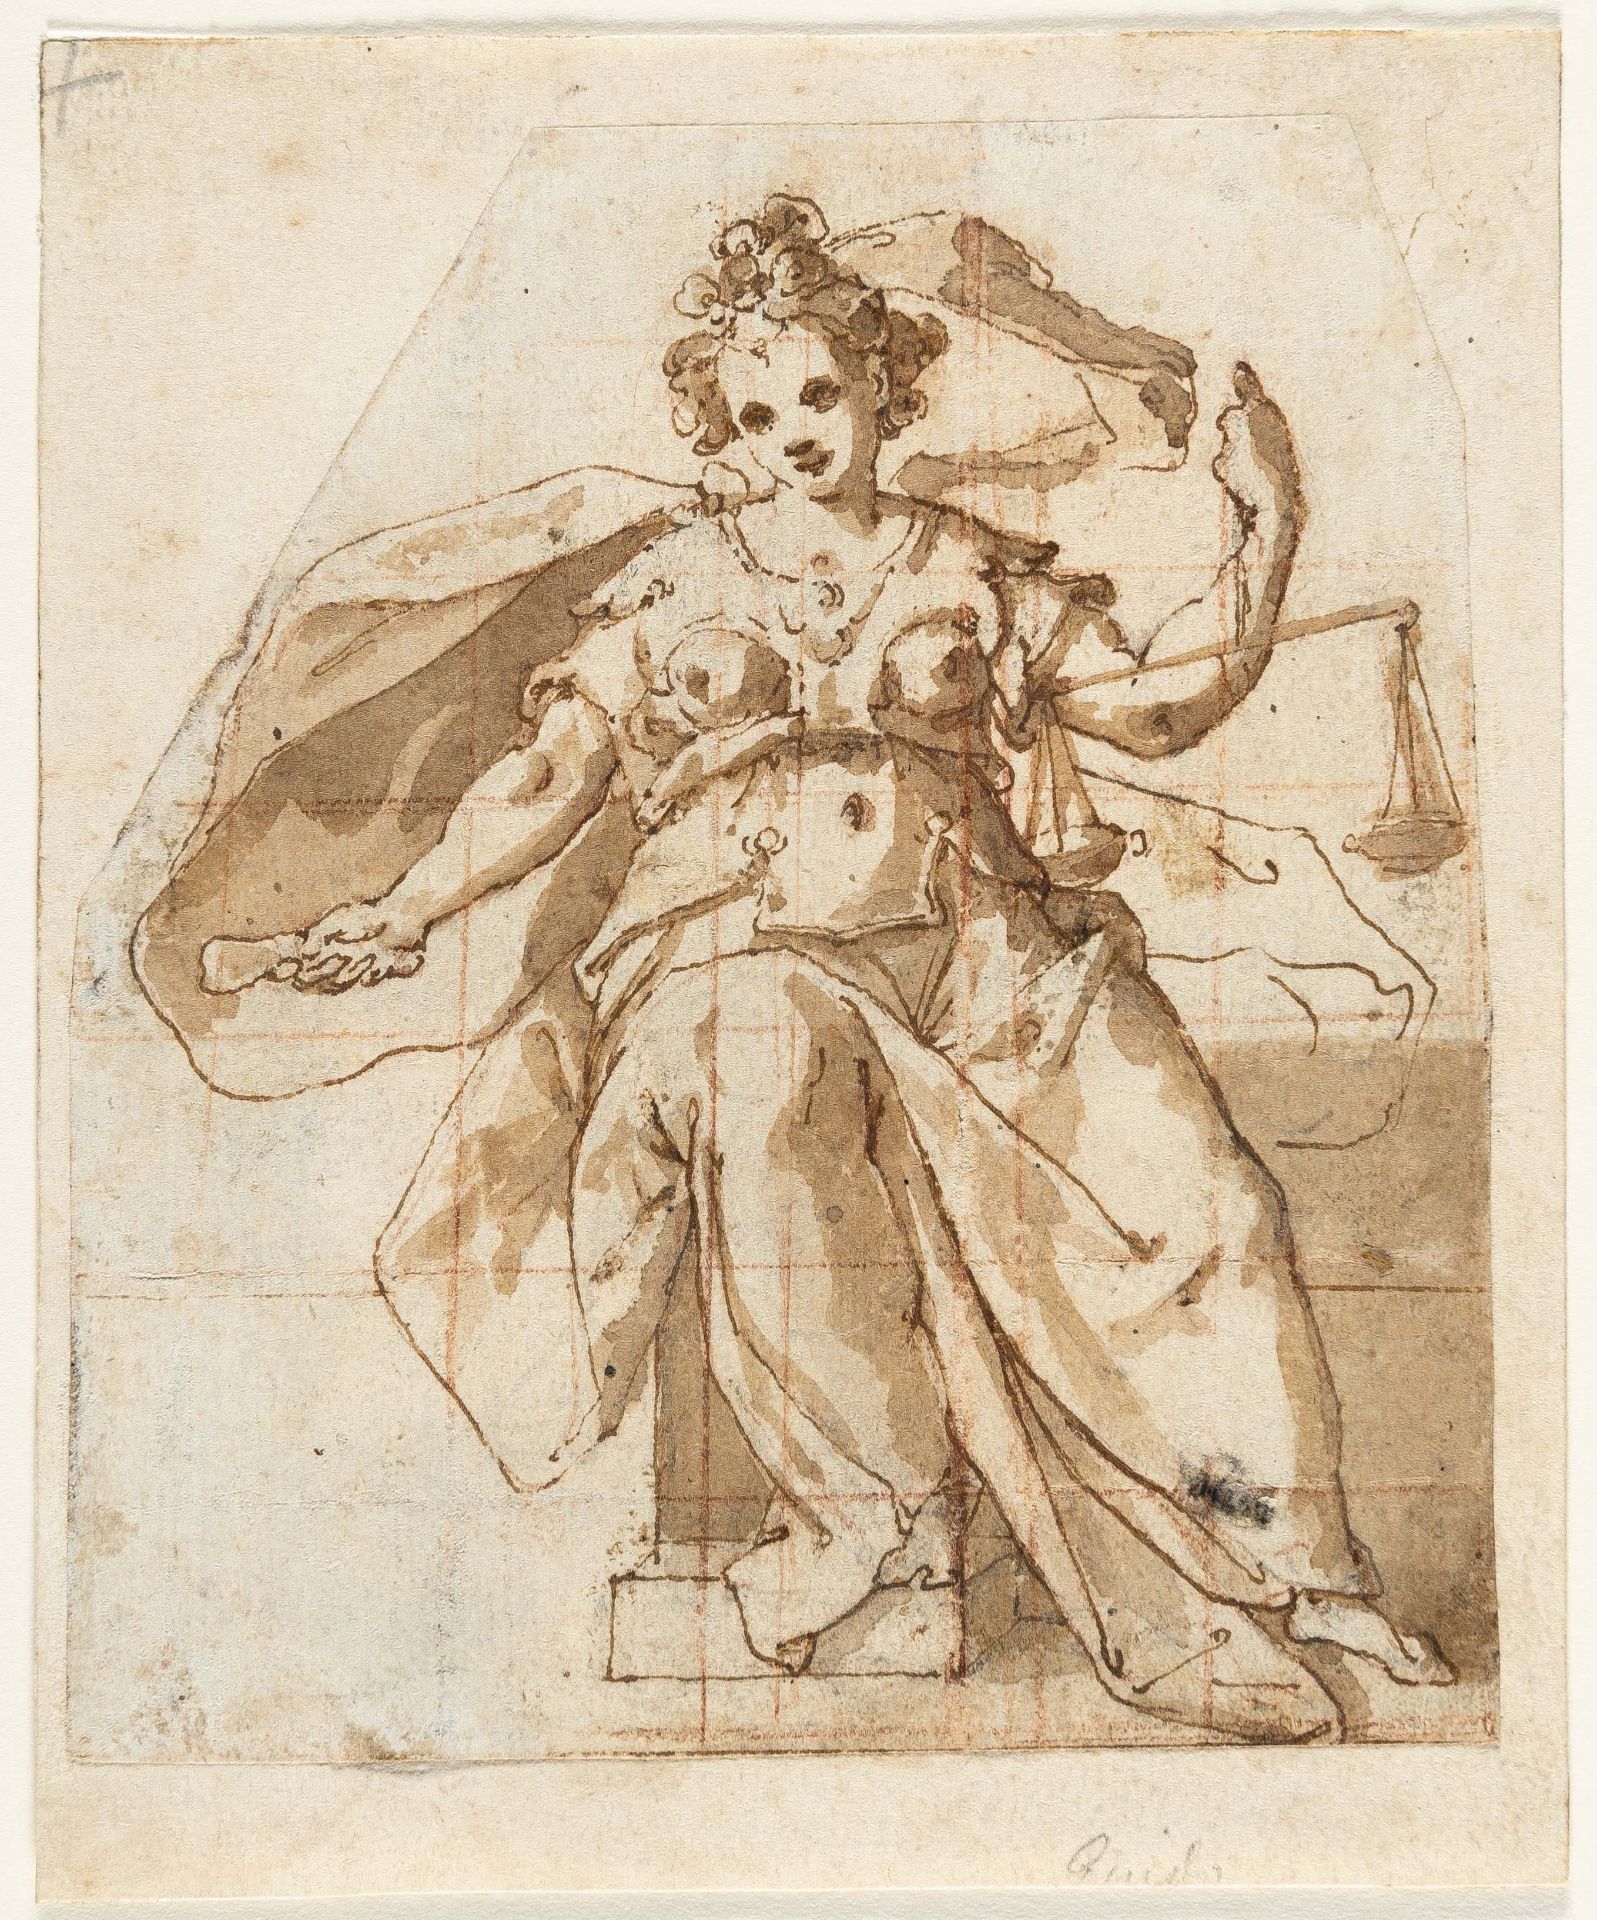 Marco Marchetti, Gen. Marco Da Faenza, Allegory of justice.Pen and brown ink, brown wash over traces - Image 2 of 3